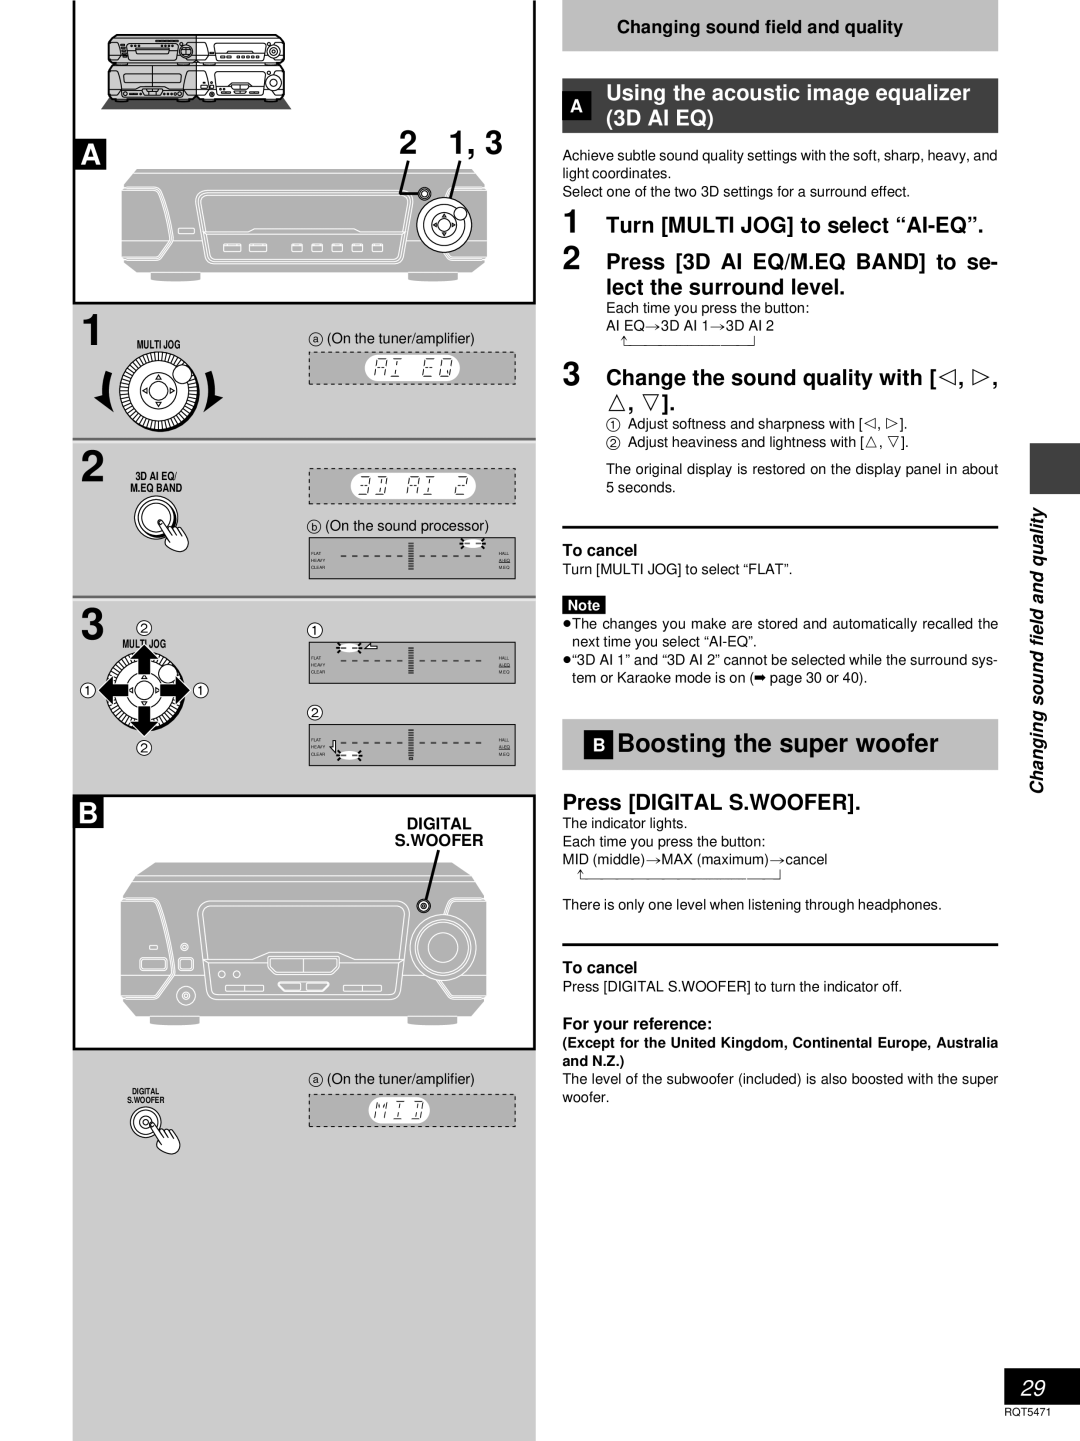 Technics SC-DV170 manual »B Boosting the super woofer, Turn MULTI JOG to select “AI-EQ”, Change the sound quality with #, $ 